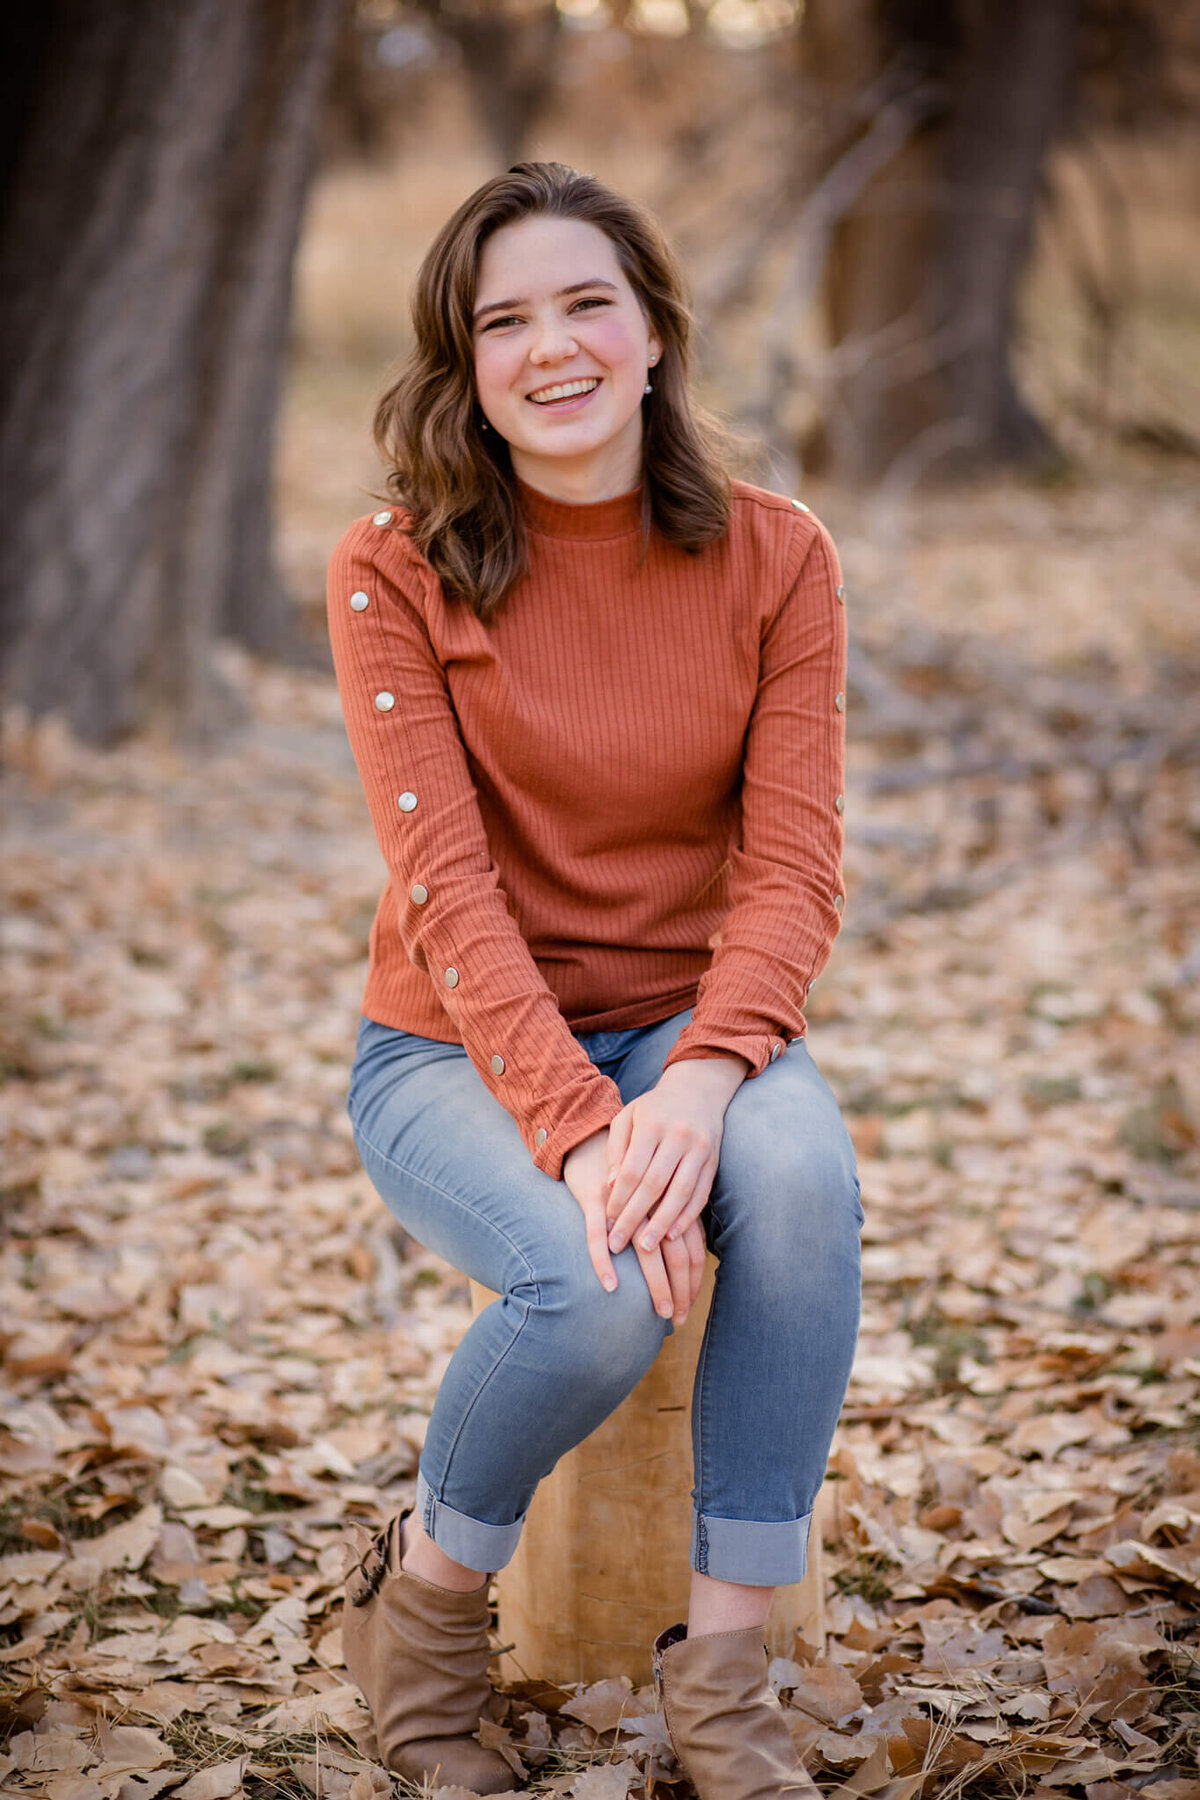 teenage girl wearing a rust colored sweater and jeans sitting on a log surrounded by fallen leaves